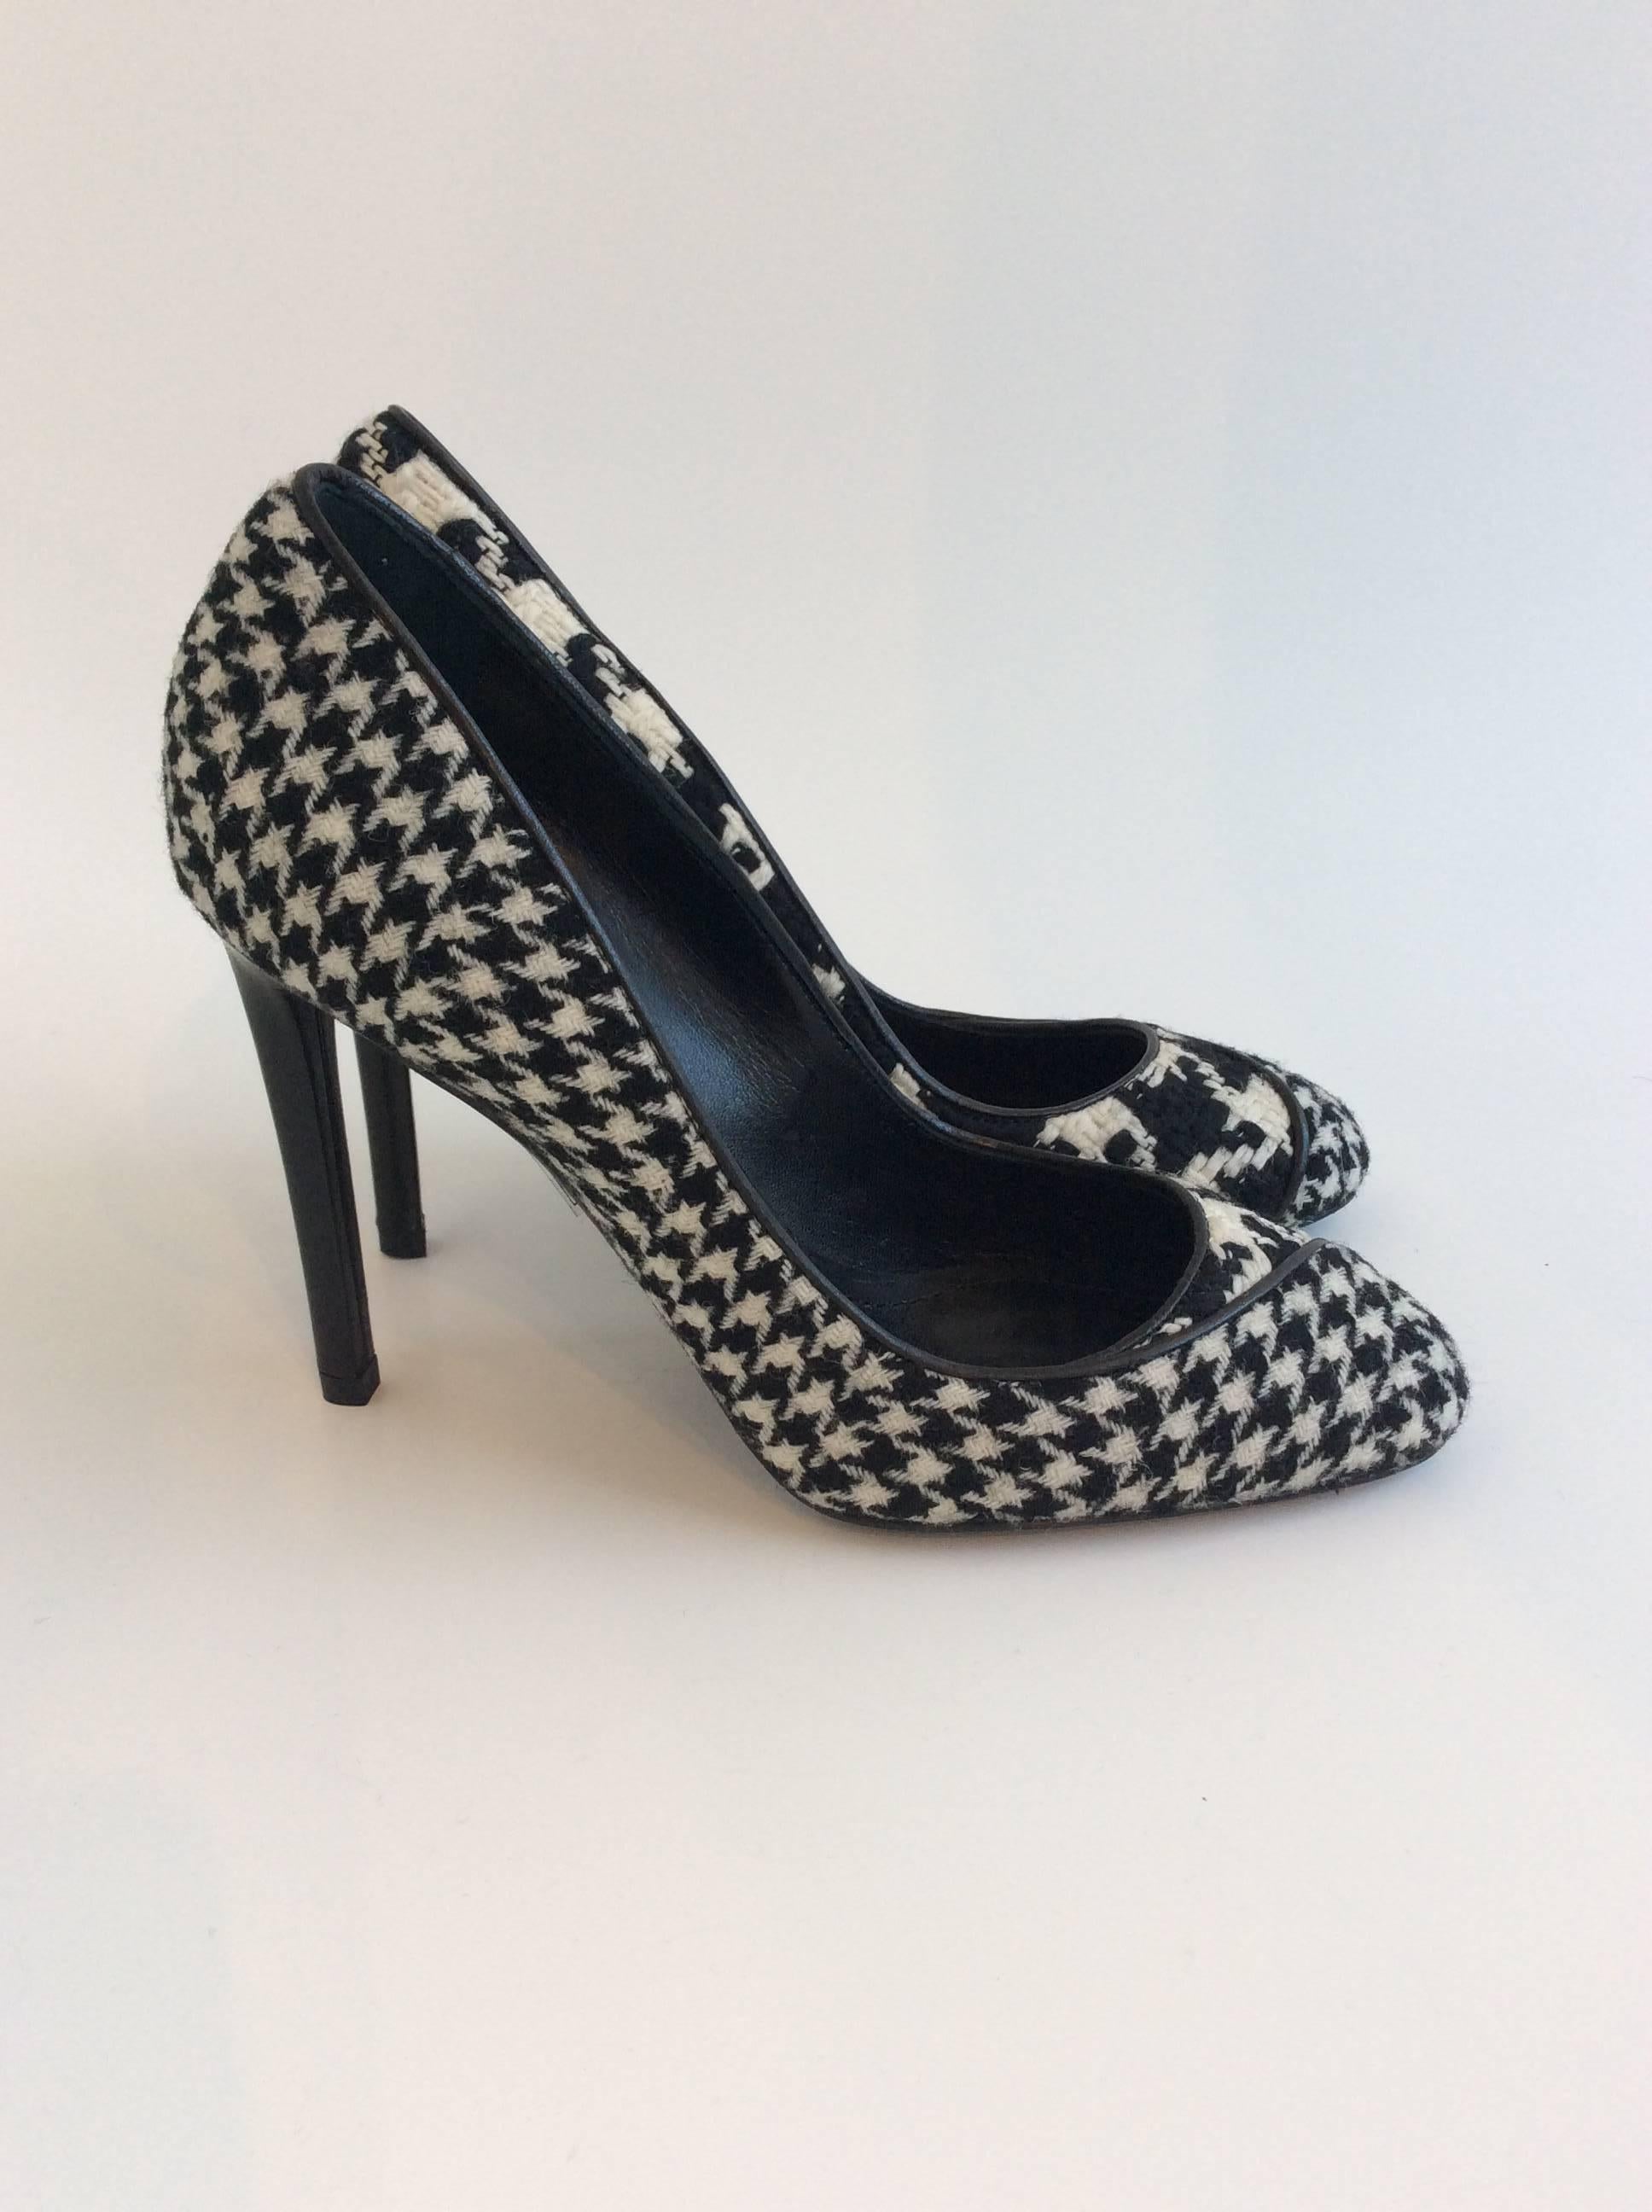 Black and cream wool fabric Christian Dior pumps in two different houndstooth patterns trimmed with black leather. The 4in heels are covered in black leather.

